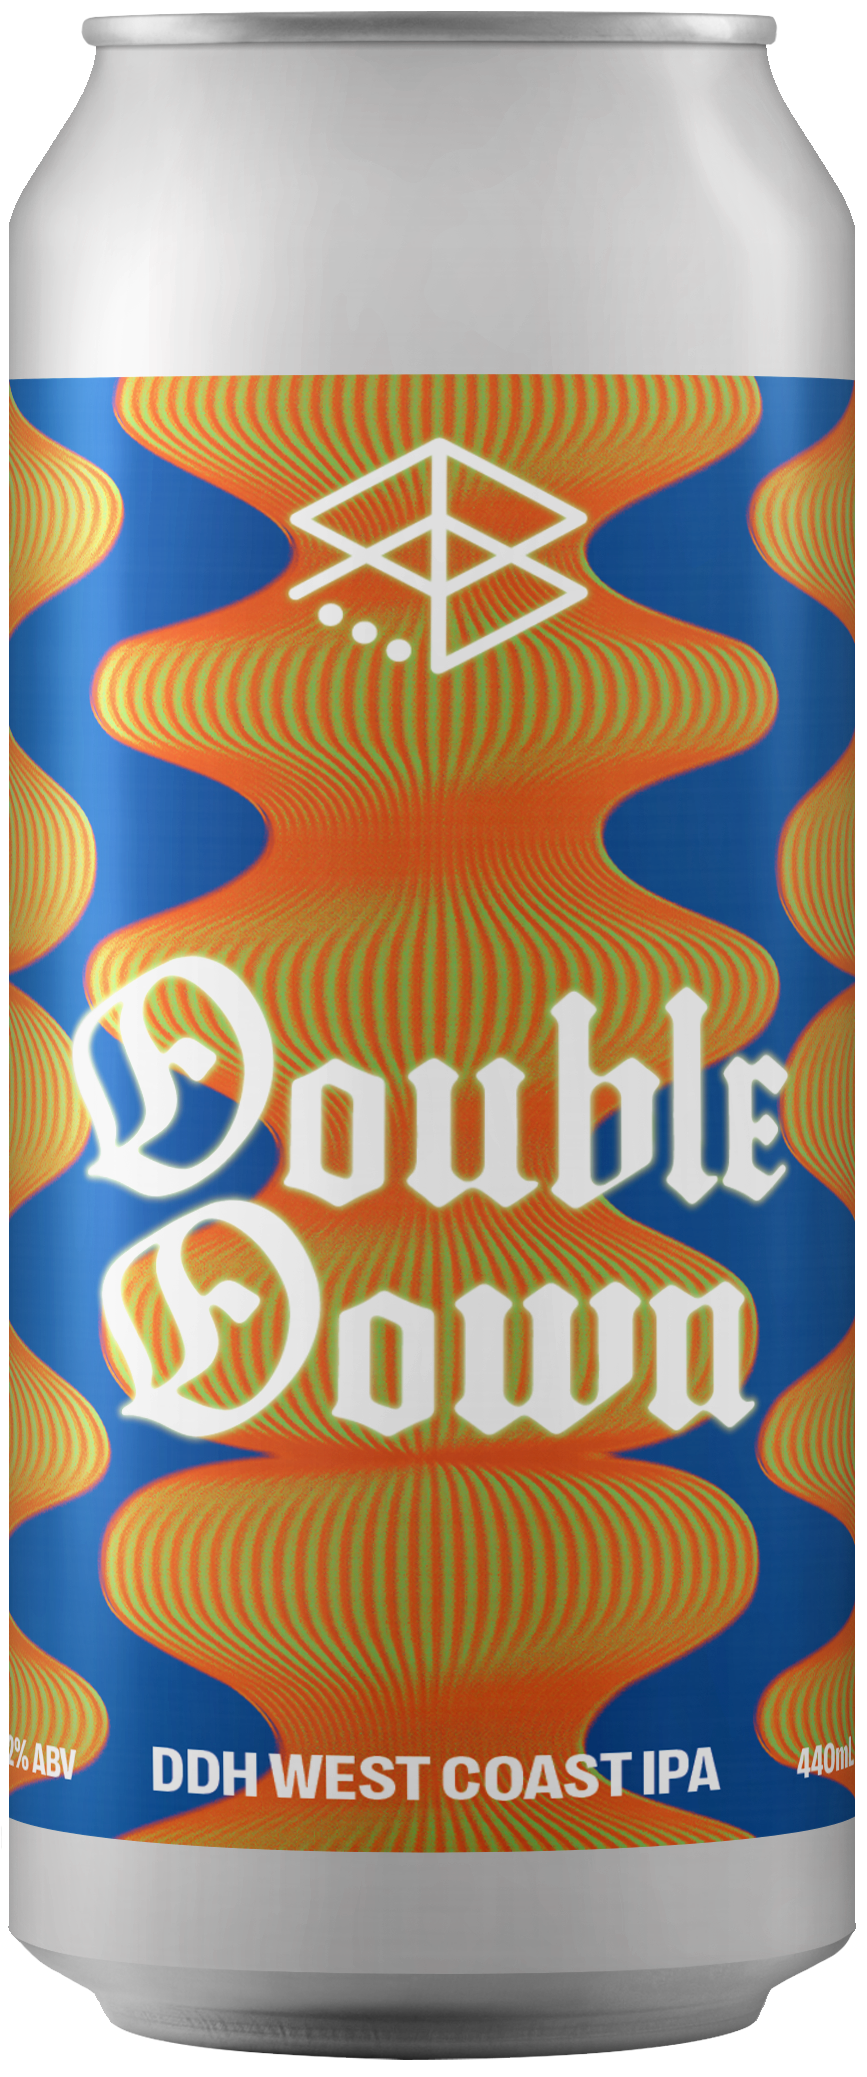 Double Down - DDH West Coast IPA